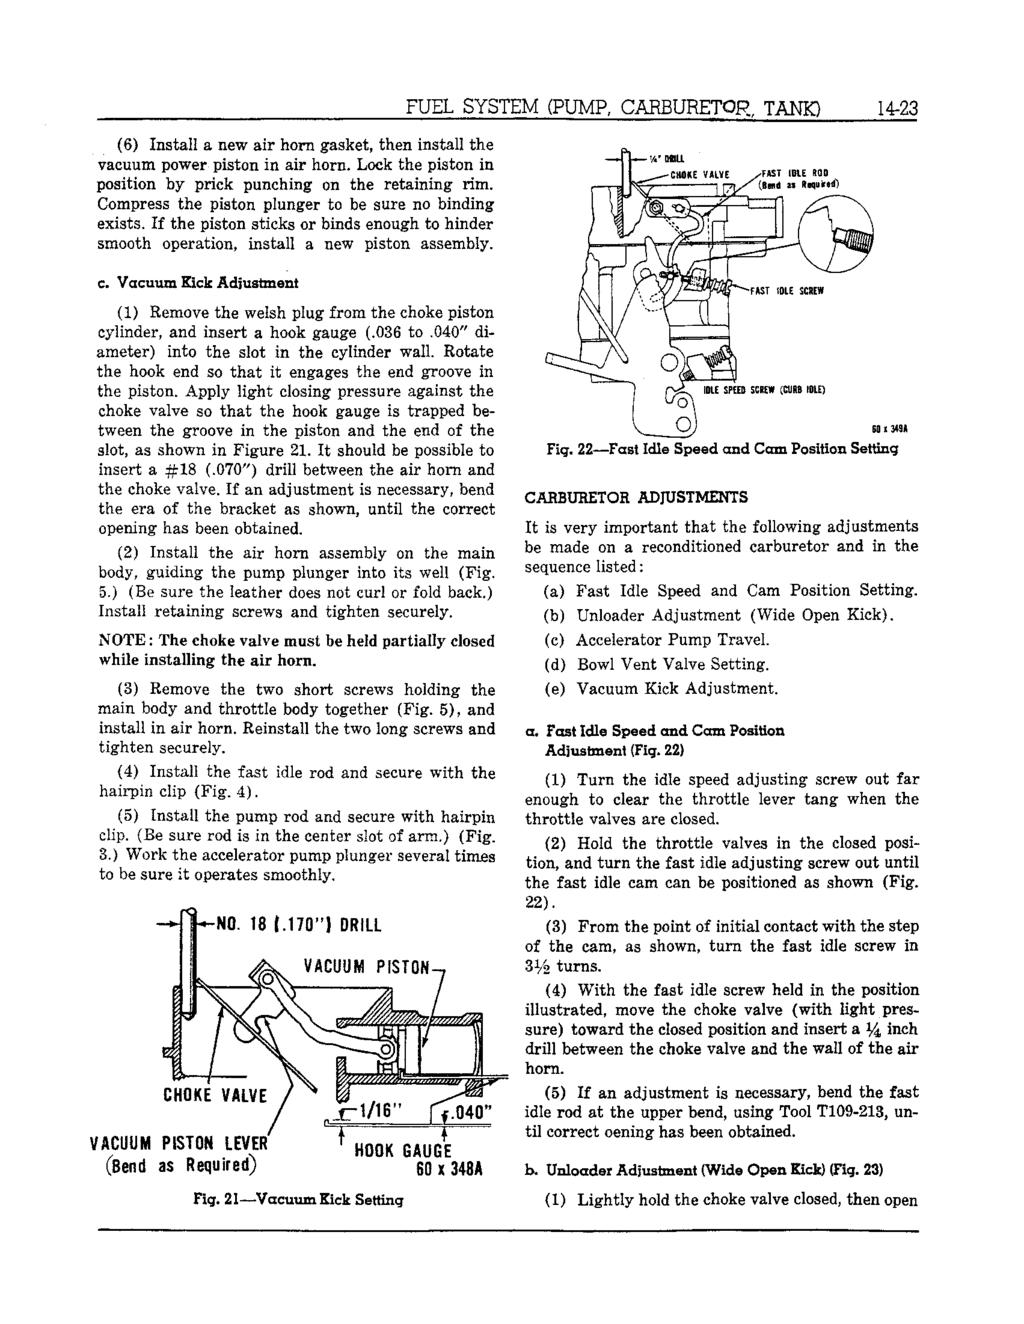 FUEL SYSTEM (PUMP, CARBURETOR TANK) 14-23 (6) Install a new air horn gasket, then install the vacuum power piston in air horn. Lock the piston in position by prick punching on the retaining rim.